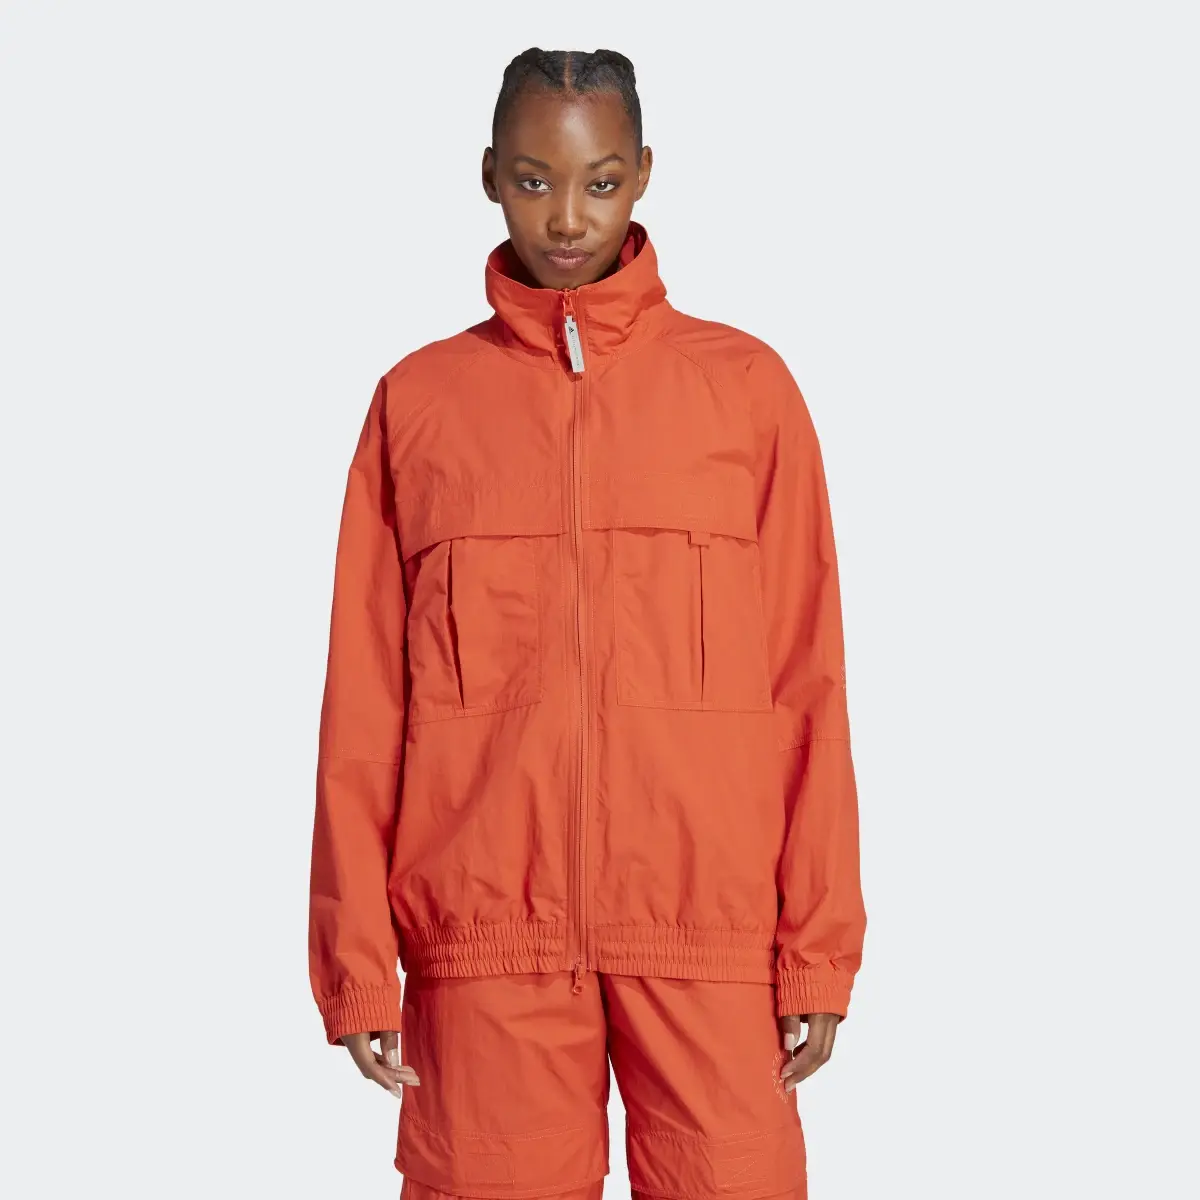 Adidas by Stella McCartney TrueCasuals Woven Solid Track Jacket. 2